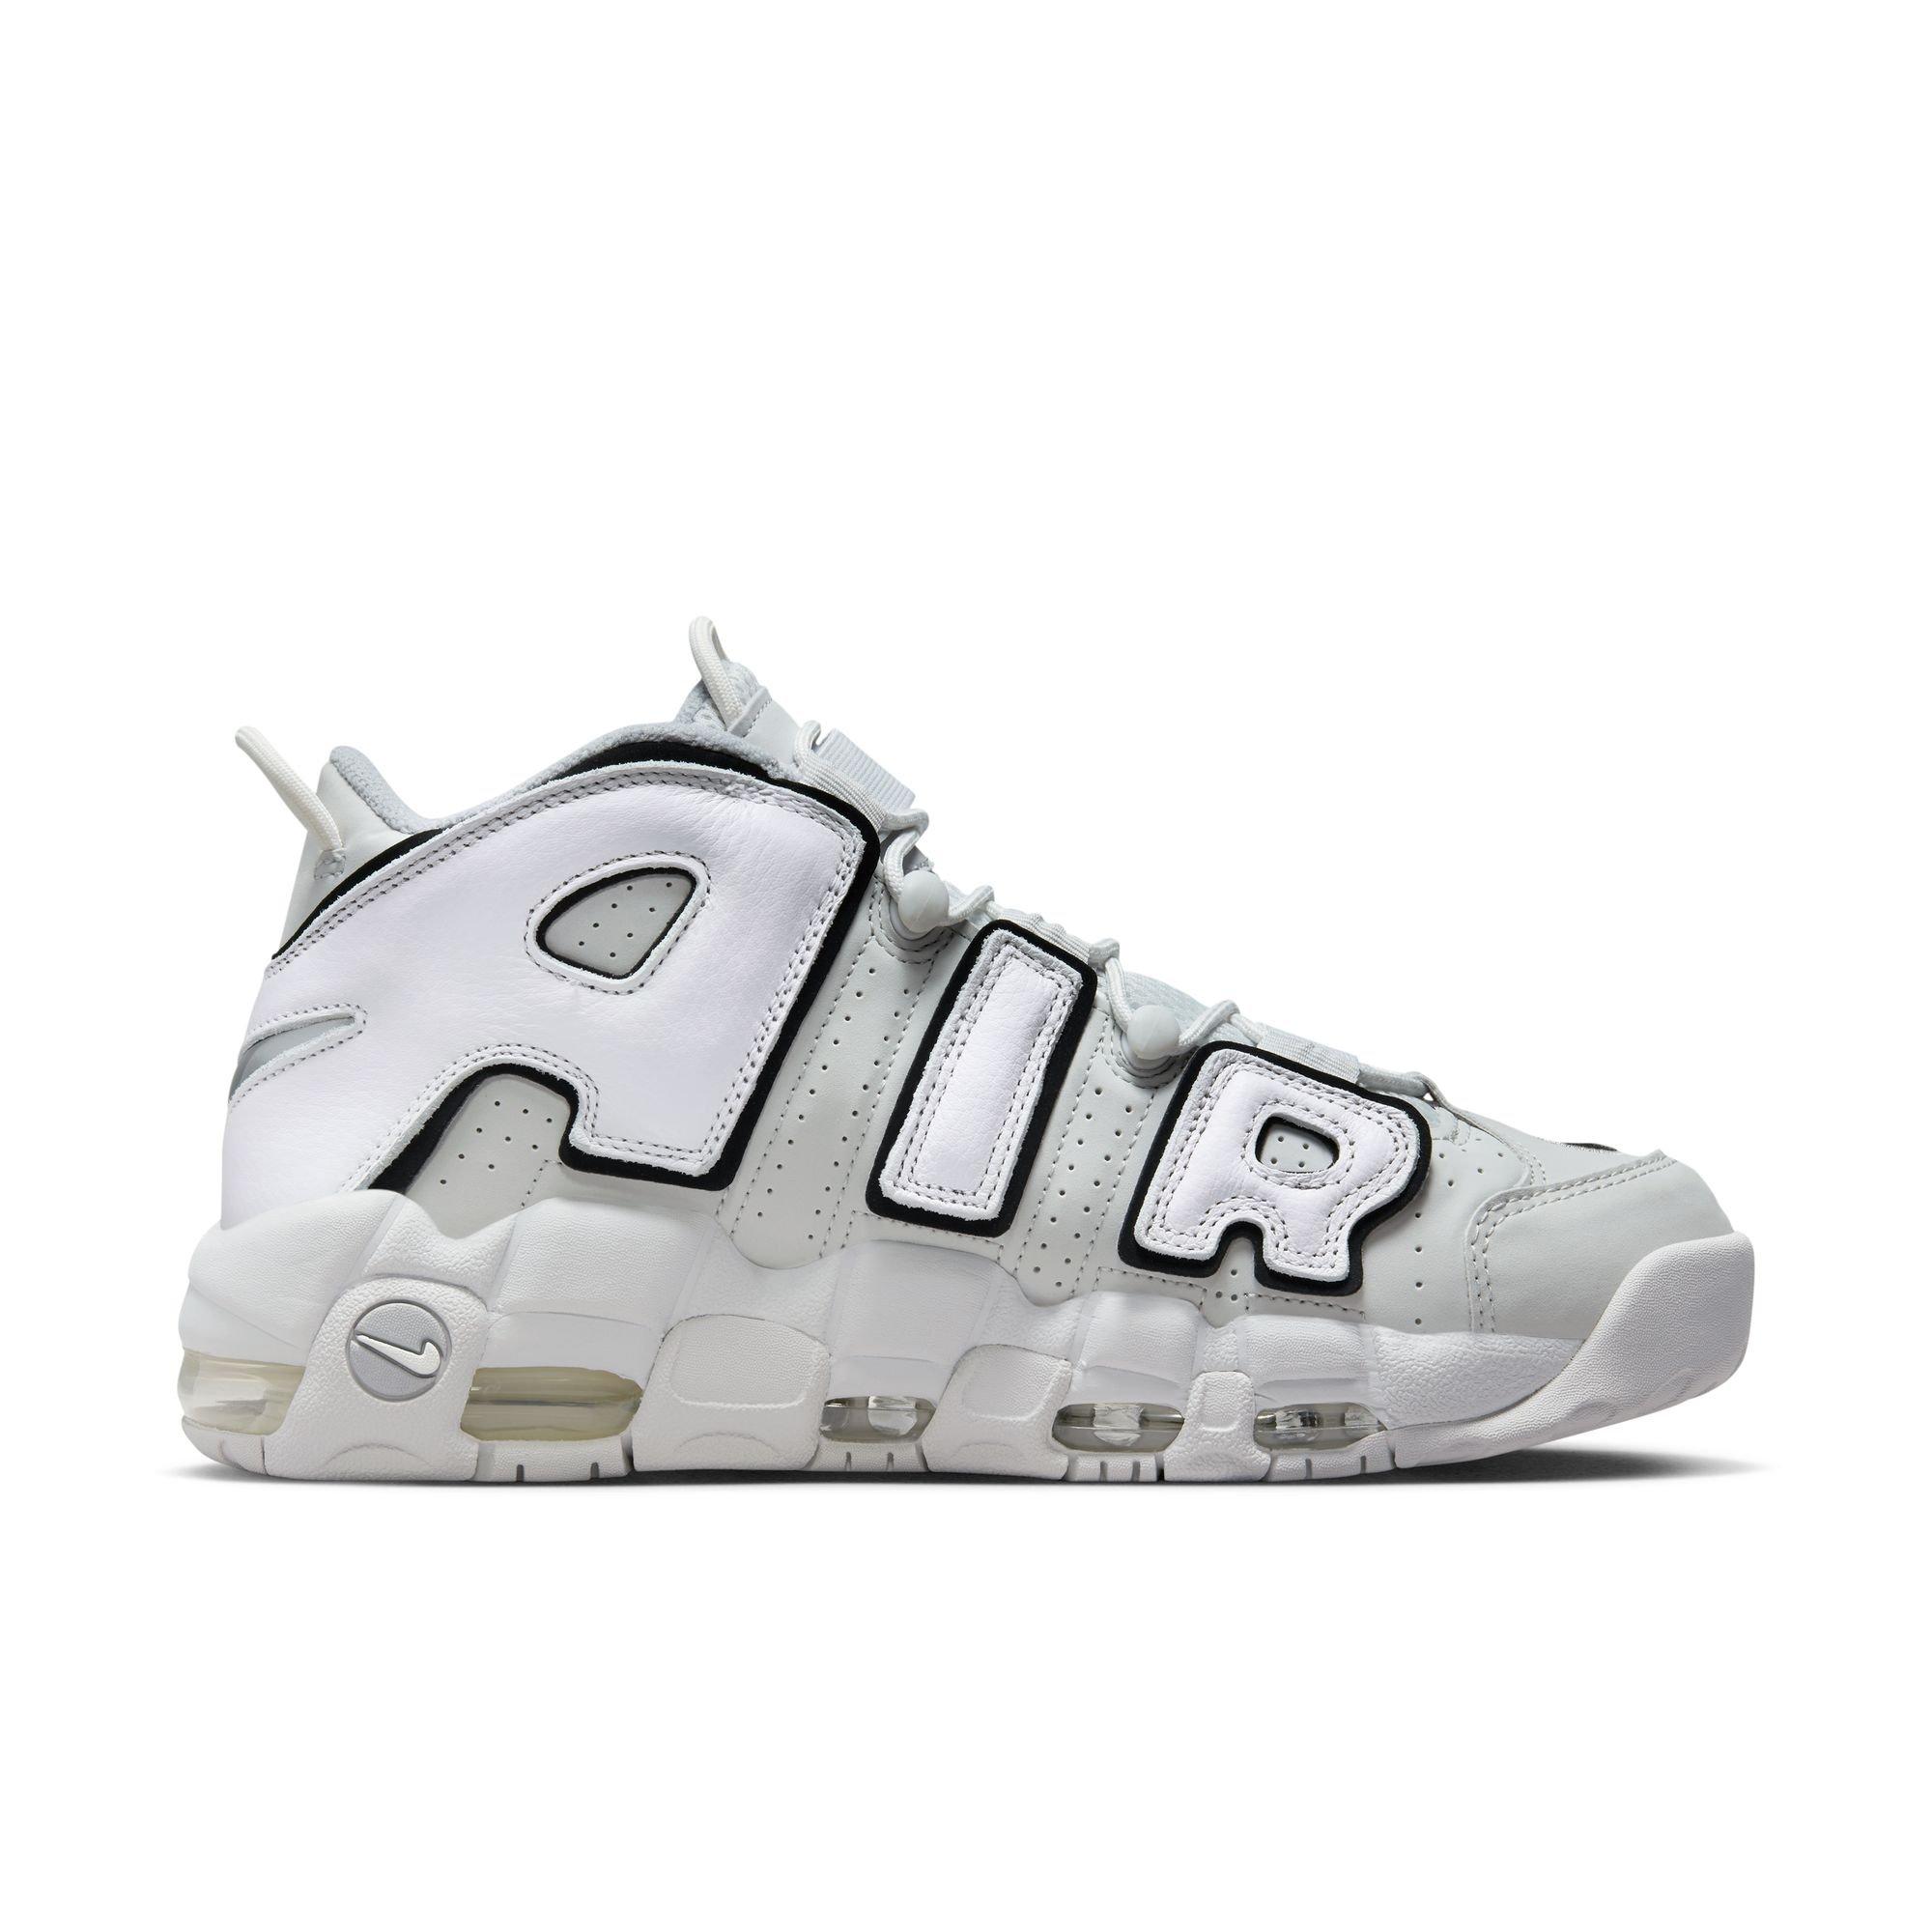 Supreme x Nike Air More Uptempos Release on April 27